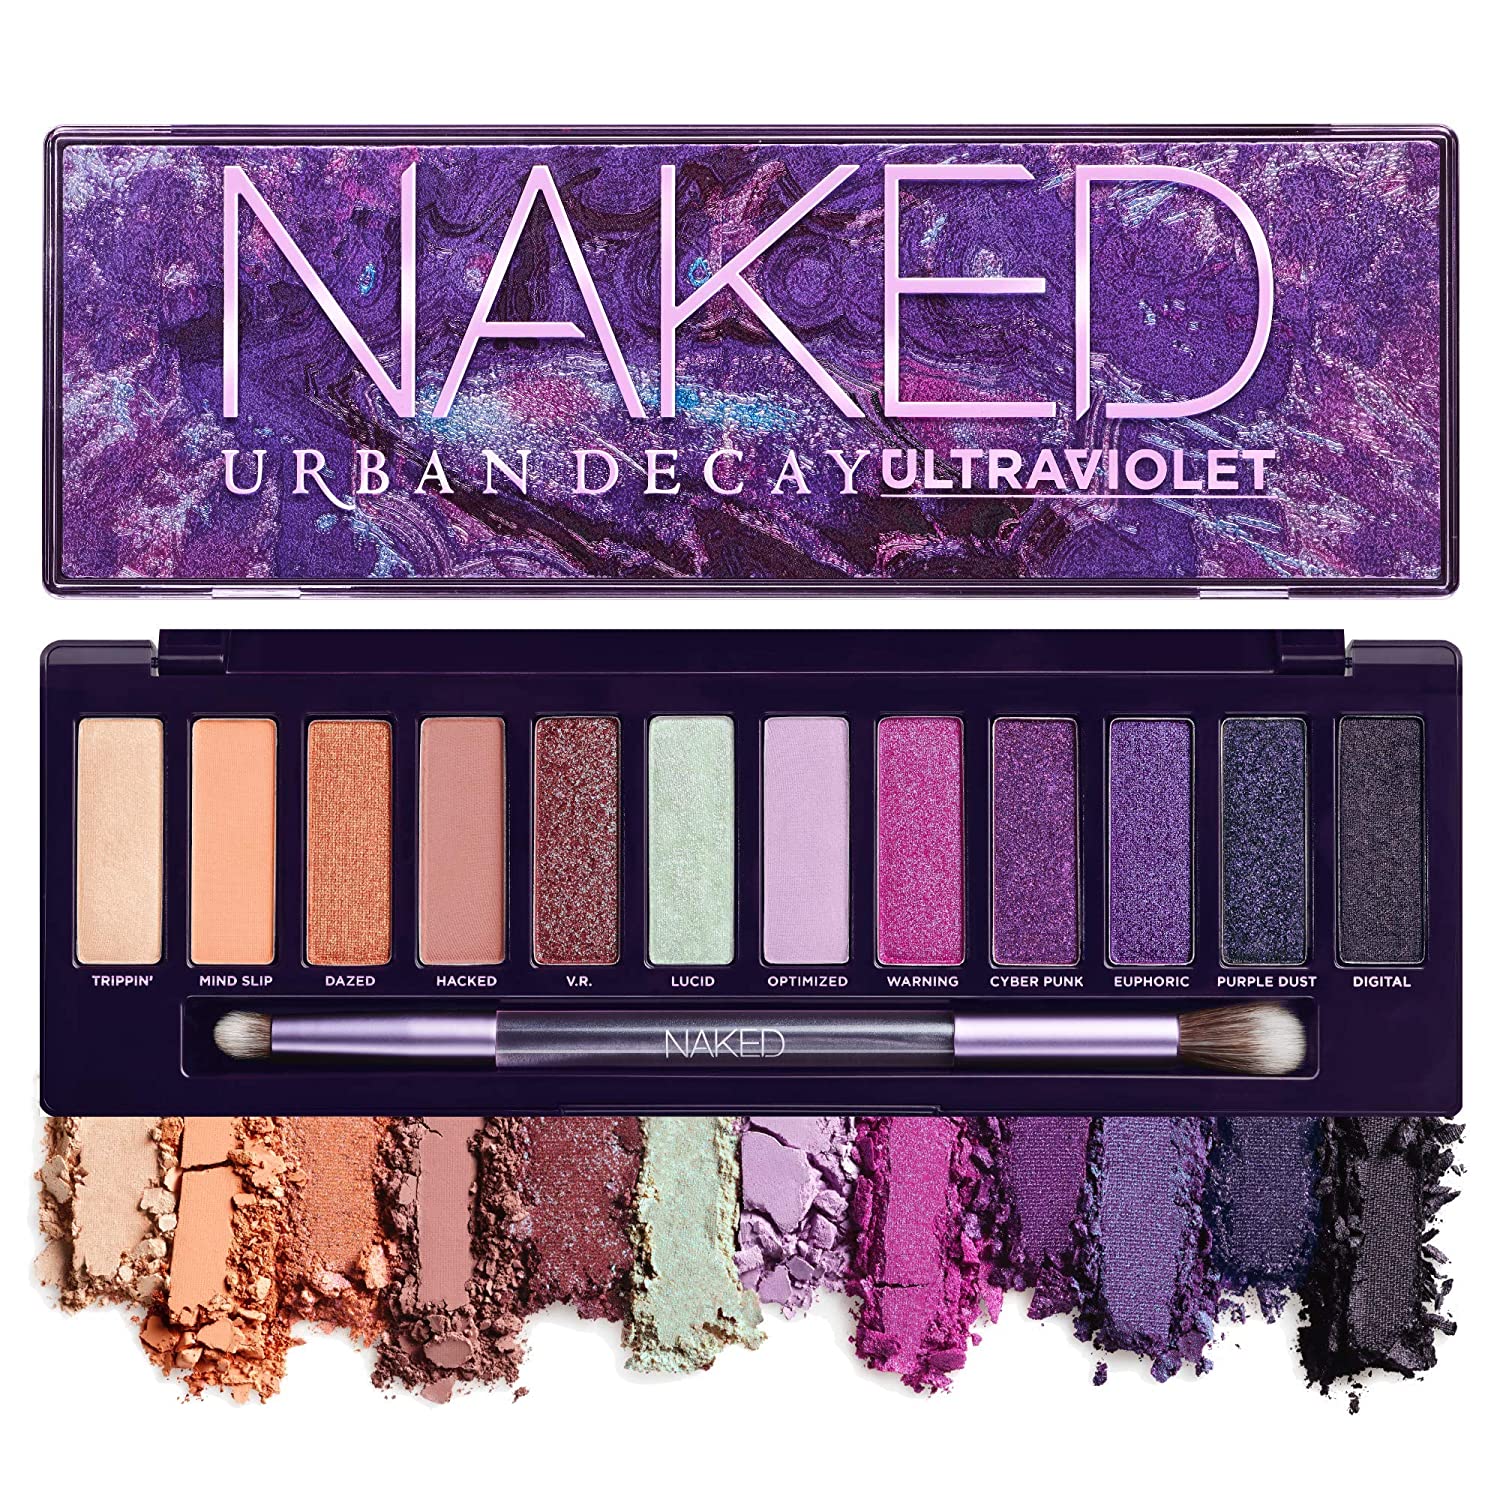 ''Urban Decay Naked Ultraviolet EYESHADOW Palette, 12 Vivid Neutral Shades with Purple Pop''